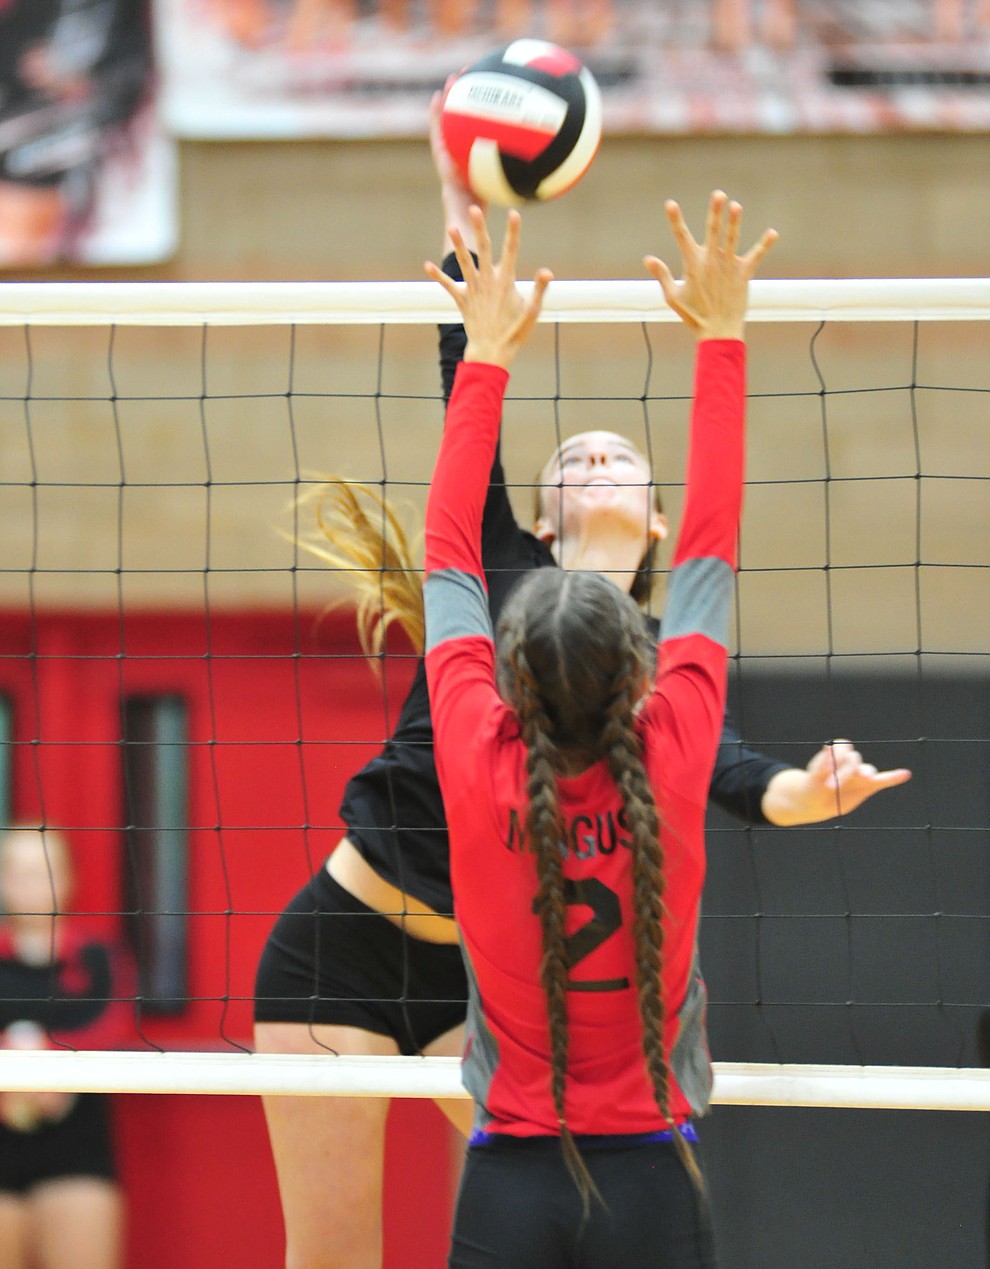 Bradshaw Mountain's Jordyn Moser hits a kill as the Bears faced the Mingus Marauders in a volleyball matchup Tuesday, Sept. 11, 2018 in Prescott Valley. (Les Stukenberg/Courier)